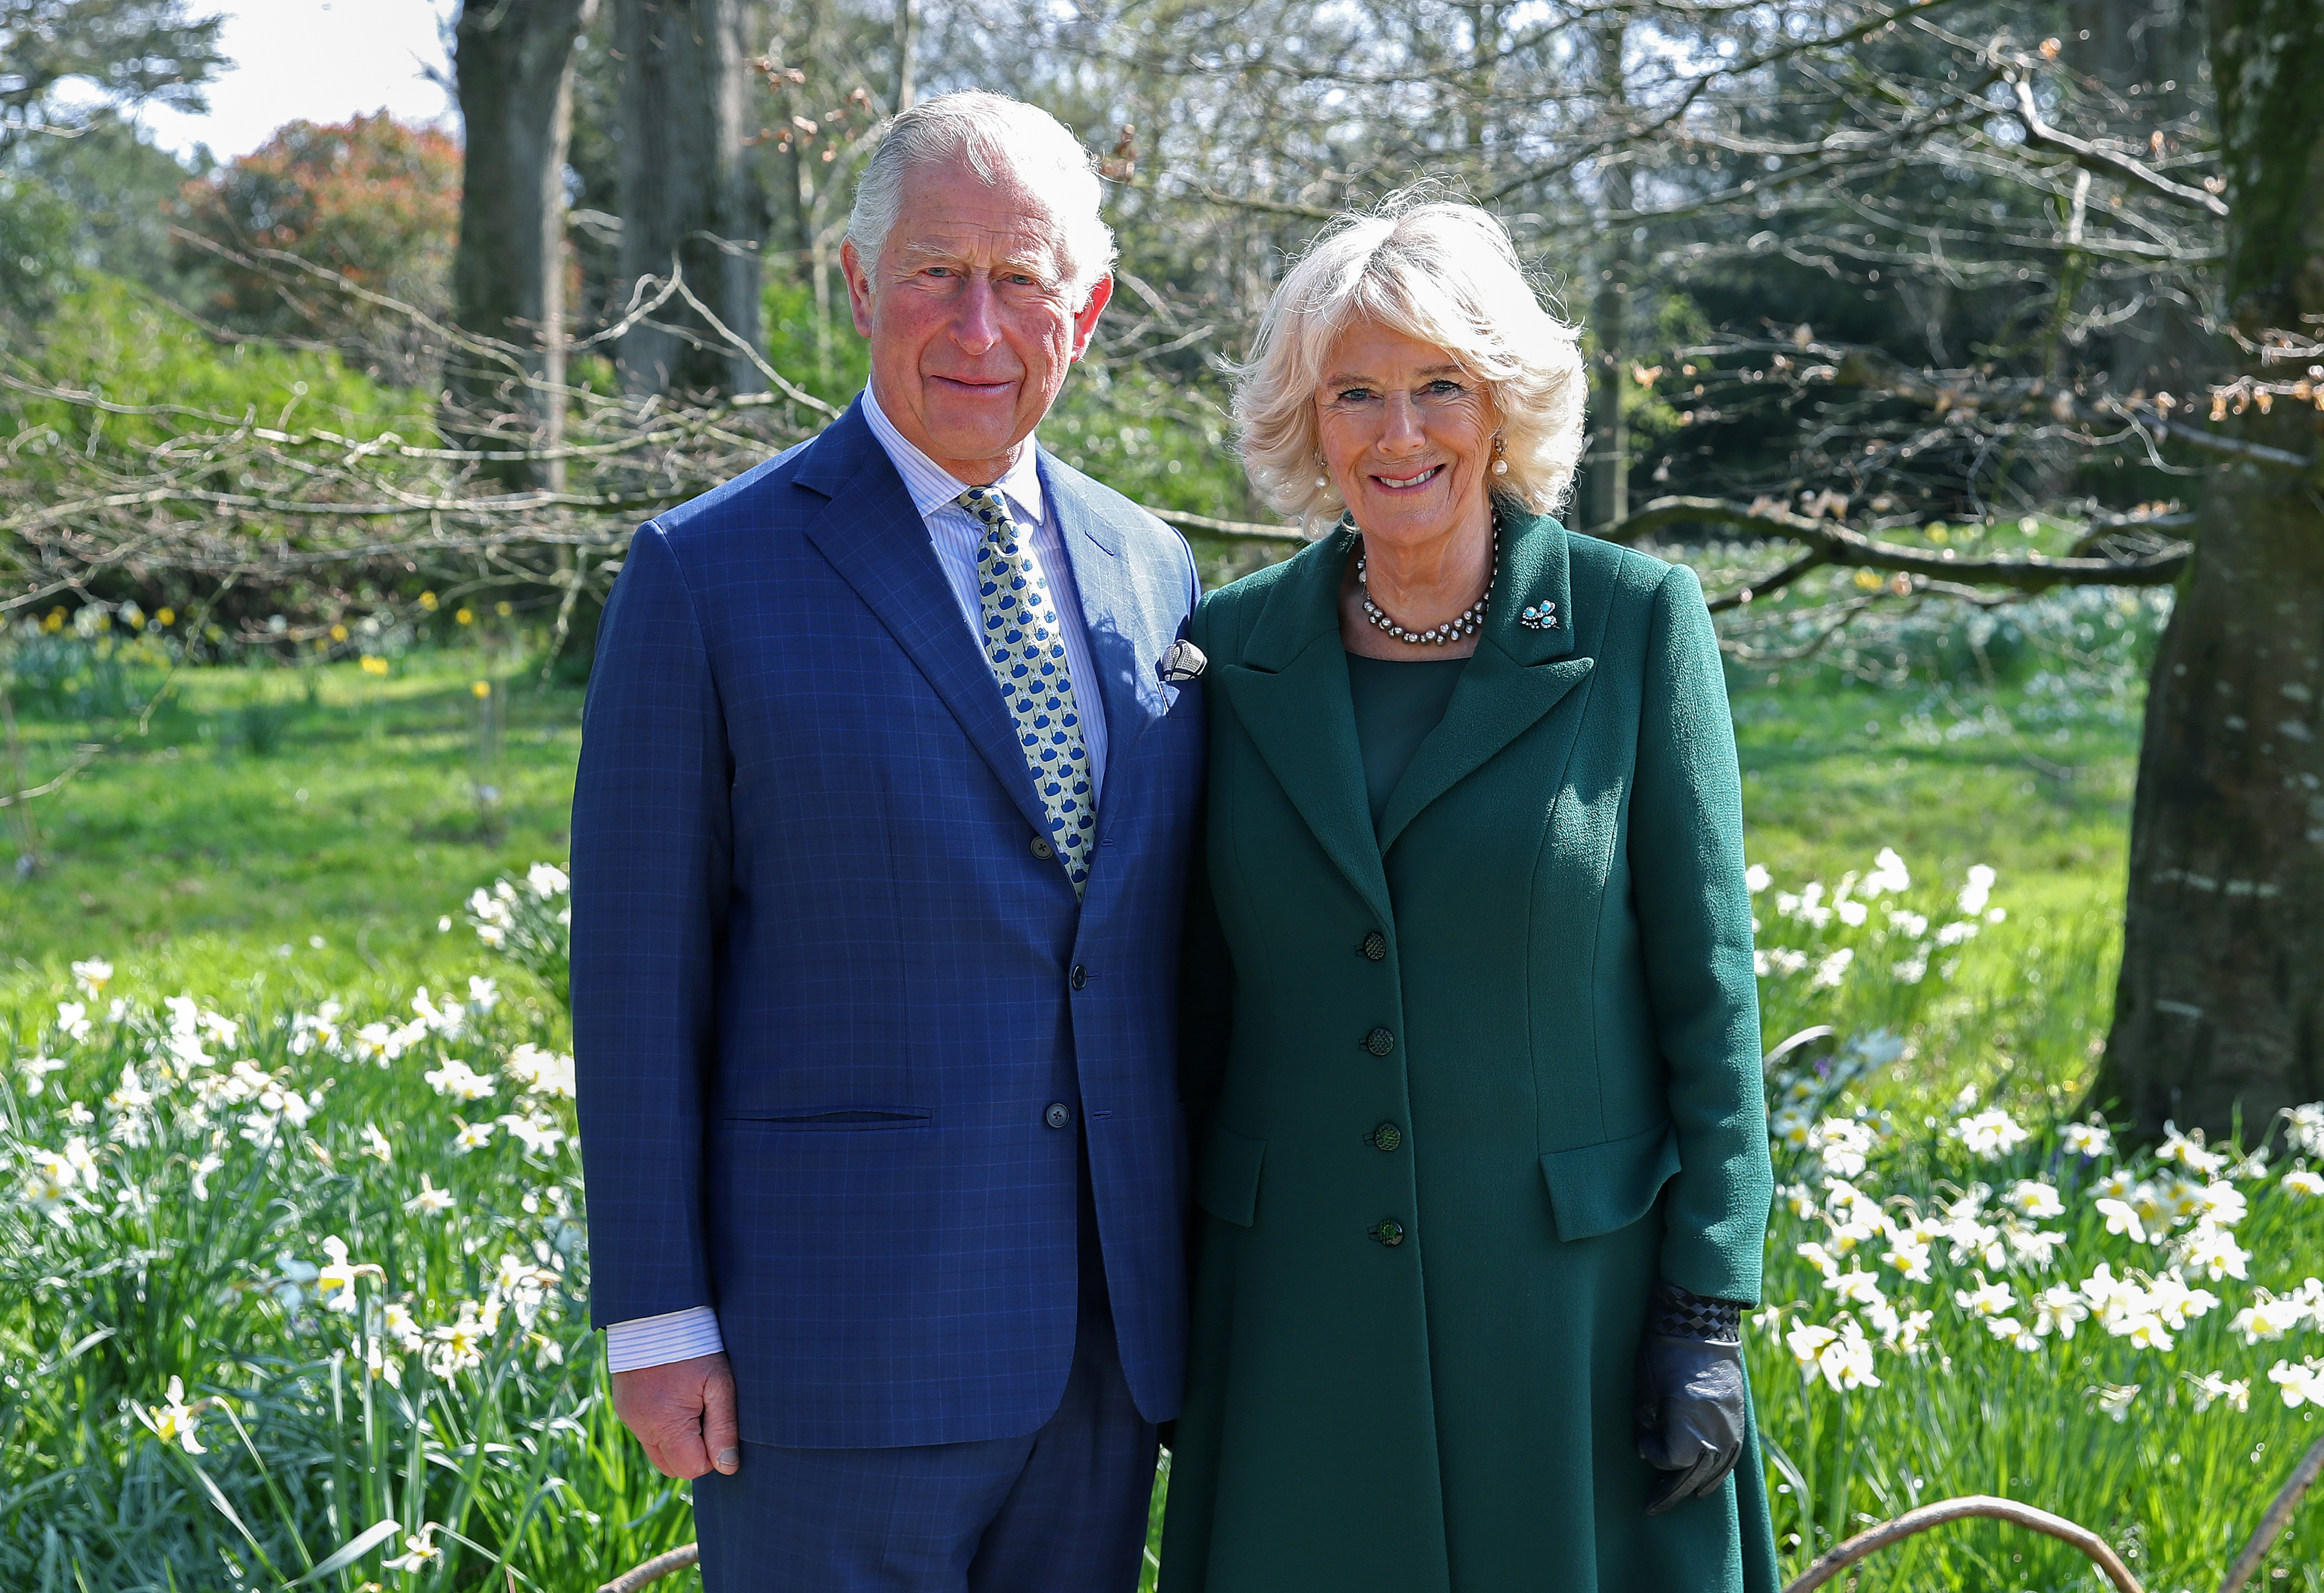 King Charles III and Queen Camilla, former Duke and Duchess of Cornwall, at Hillsborough Castle on April 09, 2019 | Source: Getty Images